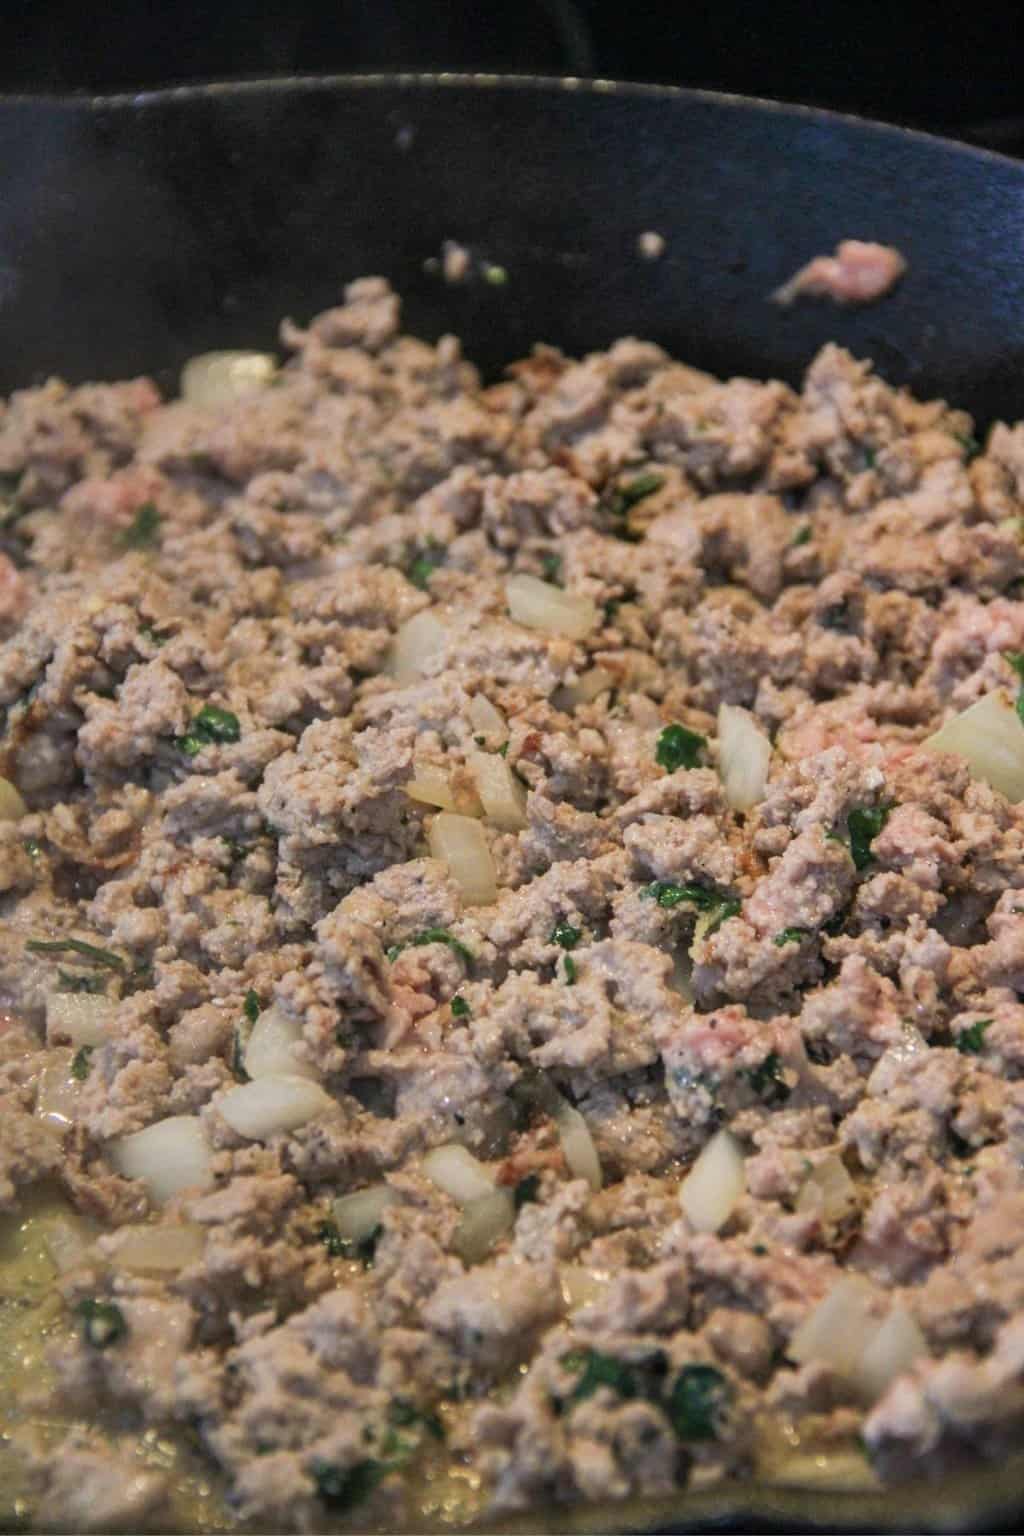 Ground meat cooking on a skillet.